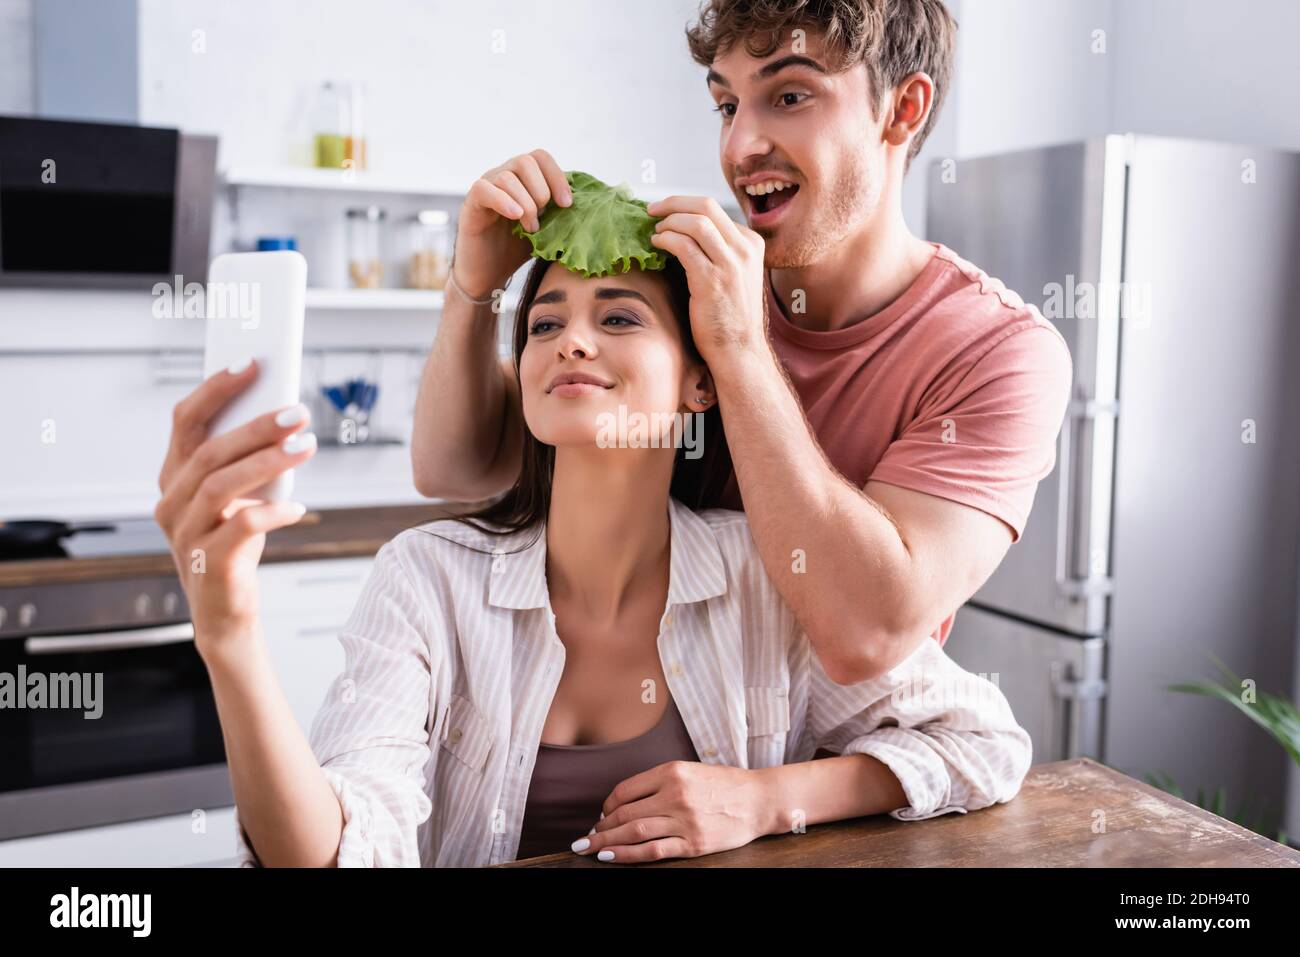 Smiling Man Holding Grater Vegetables Girlfriend Spatula Stove